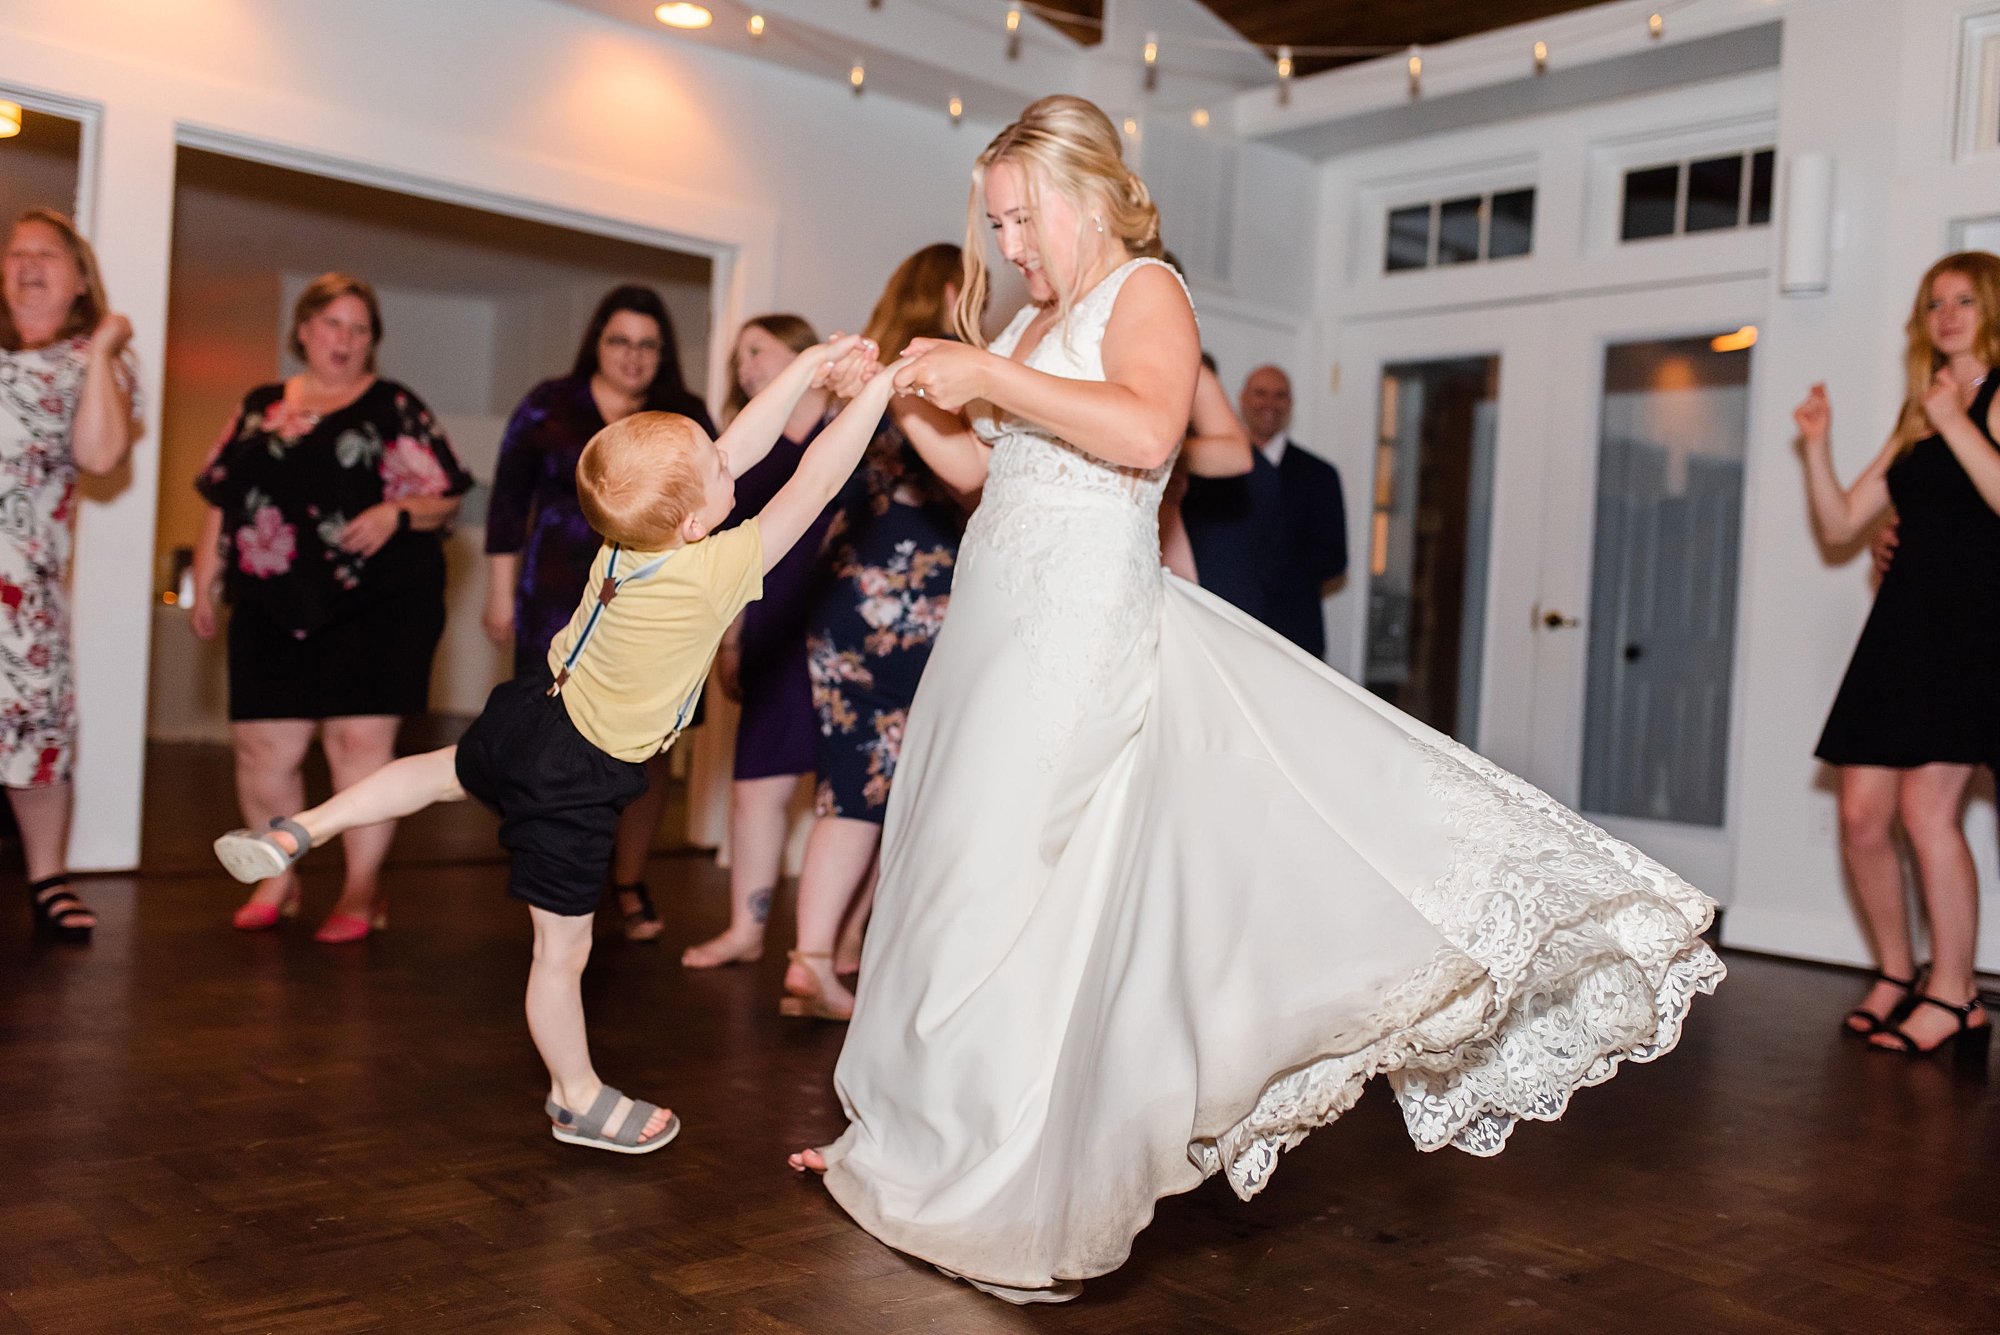 bride dances with young guest during MD wedding reception 